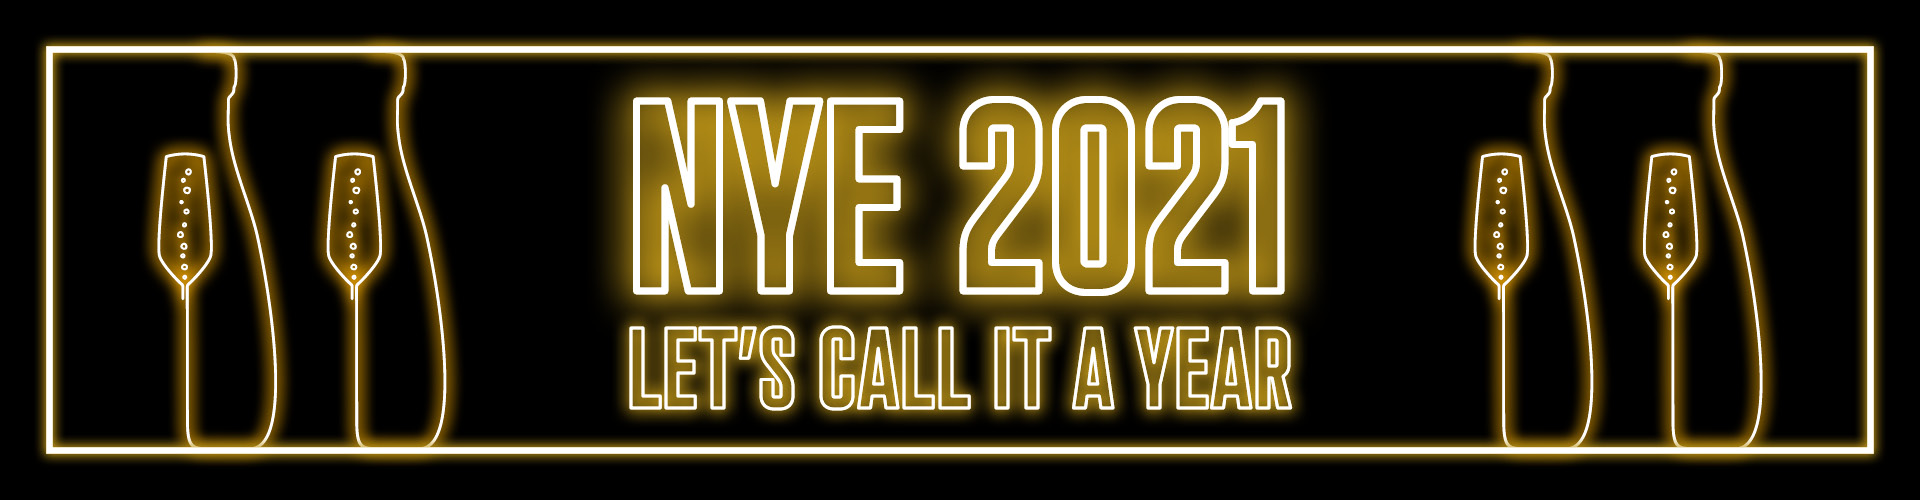 NYE 2021 - Let's Call It a Year!